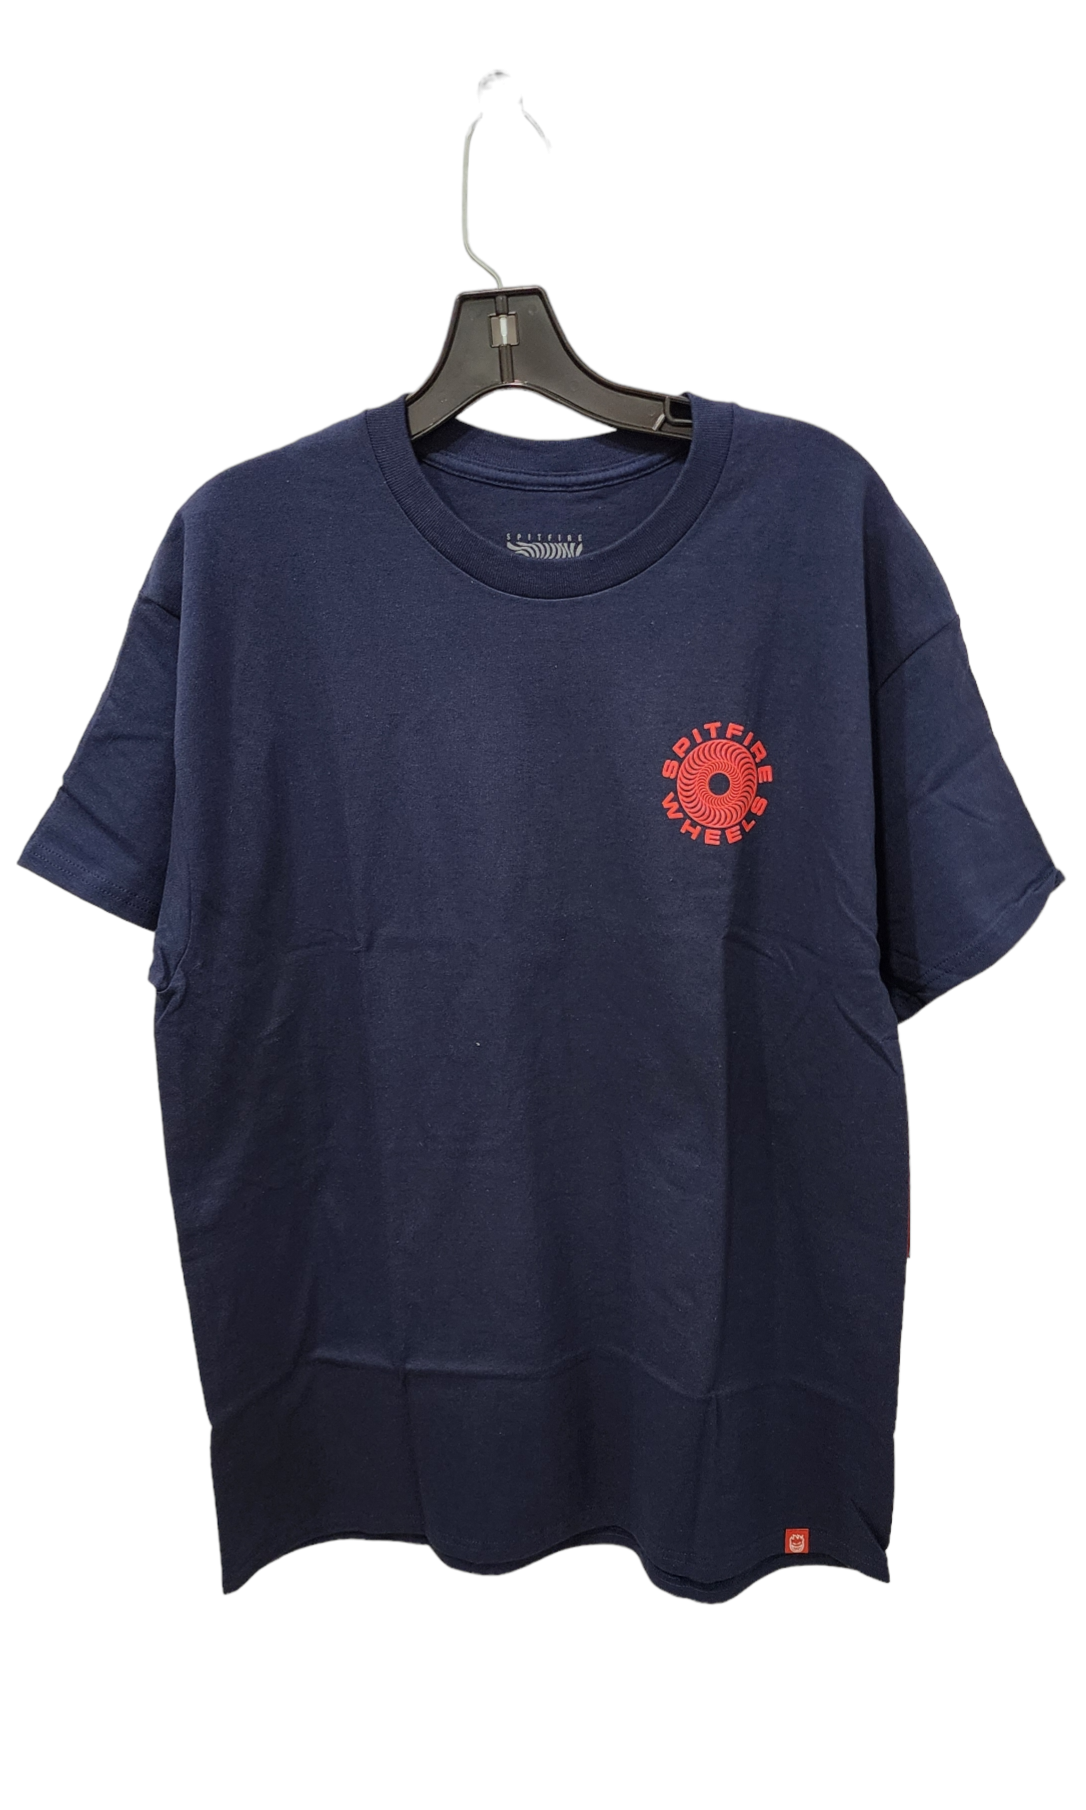 SPITFIRE CLASSIC '87 SWORL SHORT SLEEVE T-SHIRT NAVY WITH RED PRINT